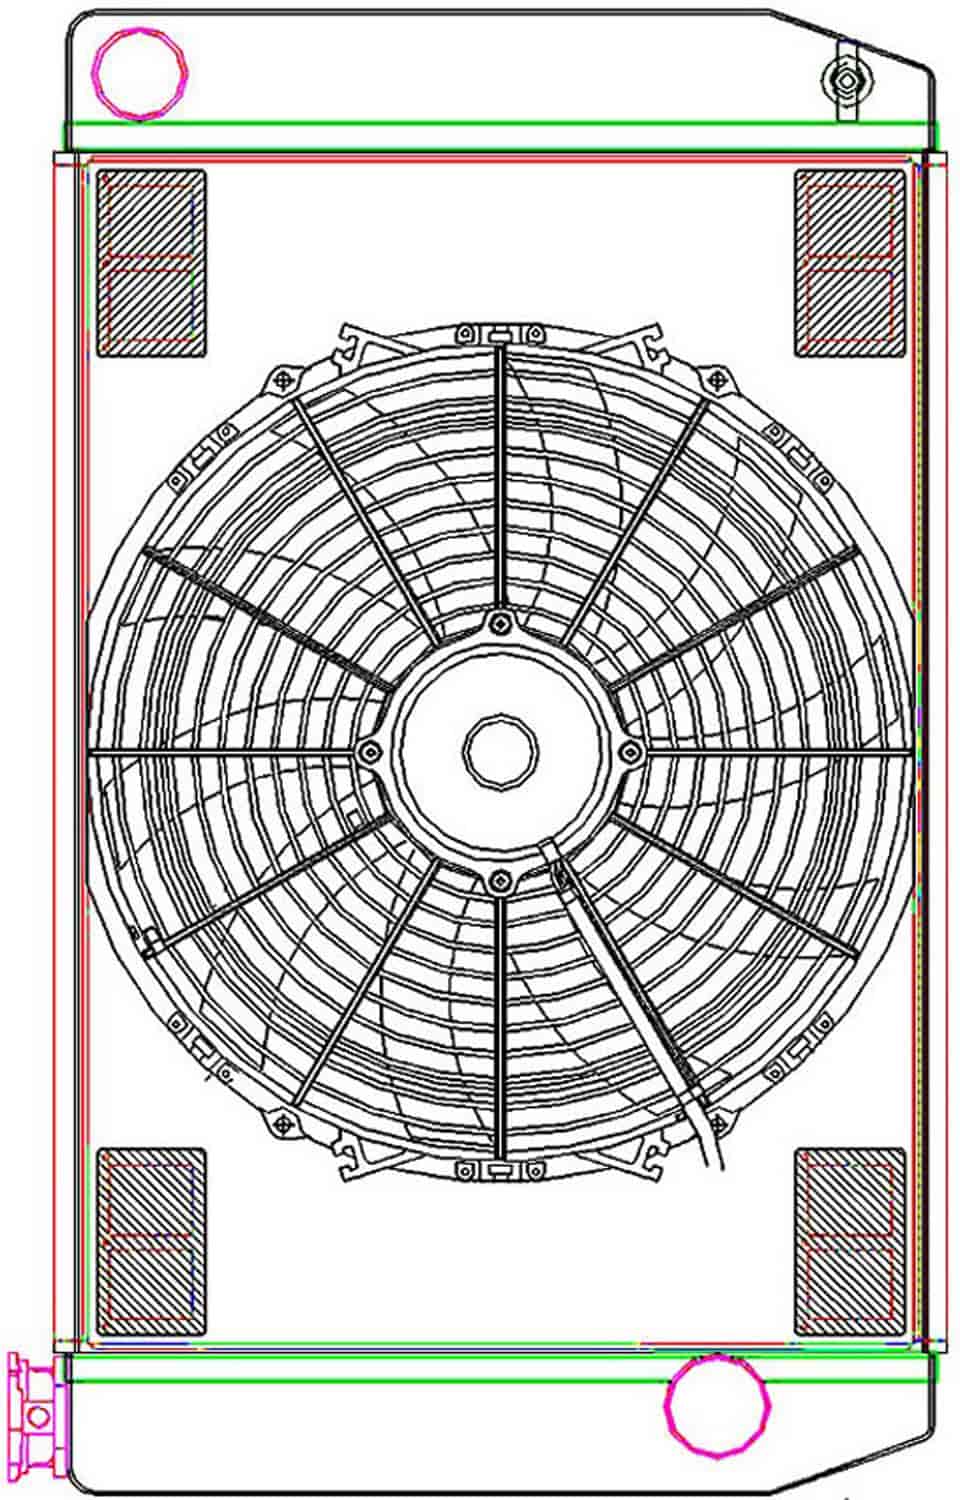 MegaCool ComboUnit Universal Fit Radiator and Fan Single Pass Crossflow Design 26" x 15.50" with Straight Outlet